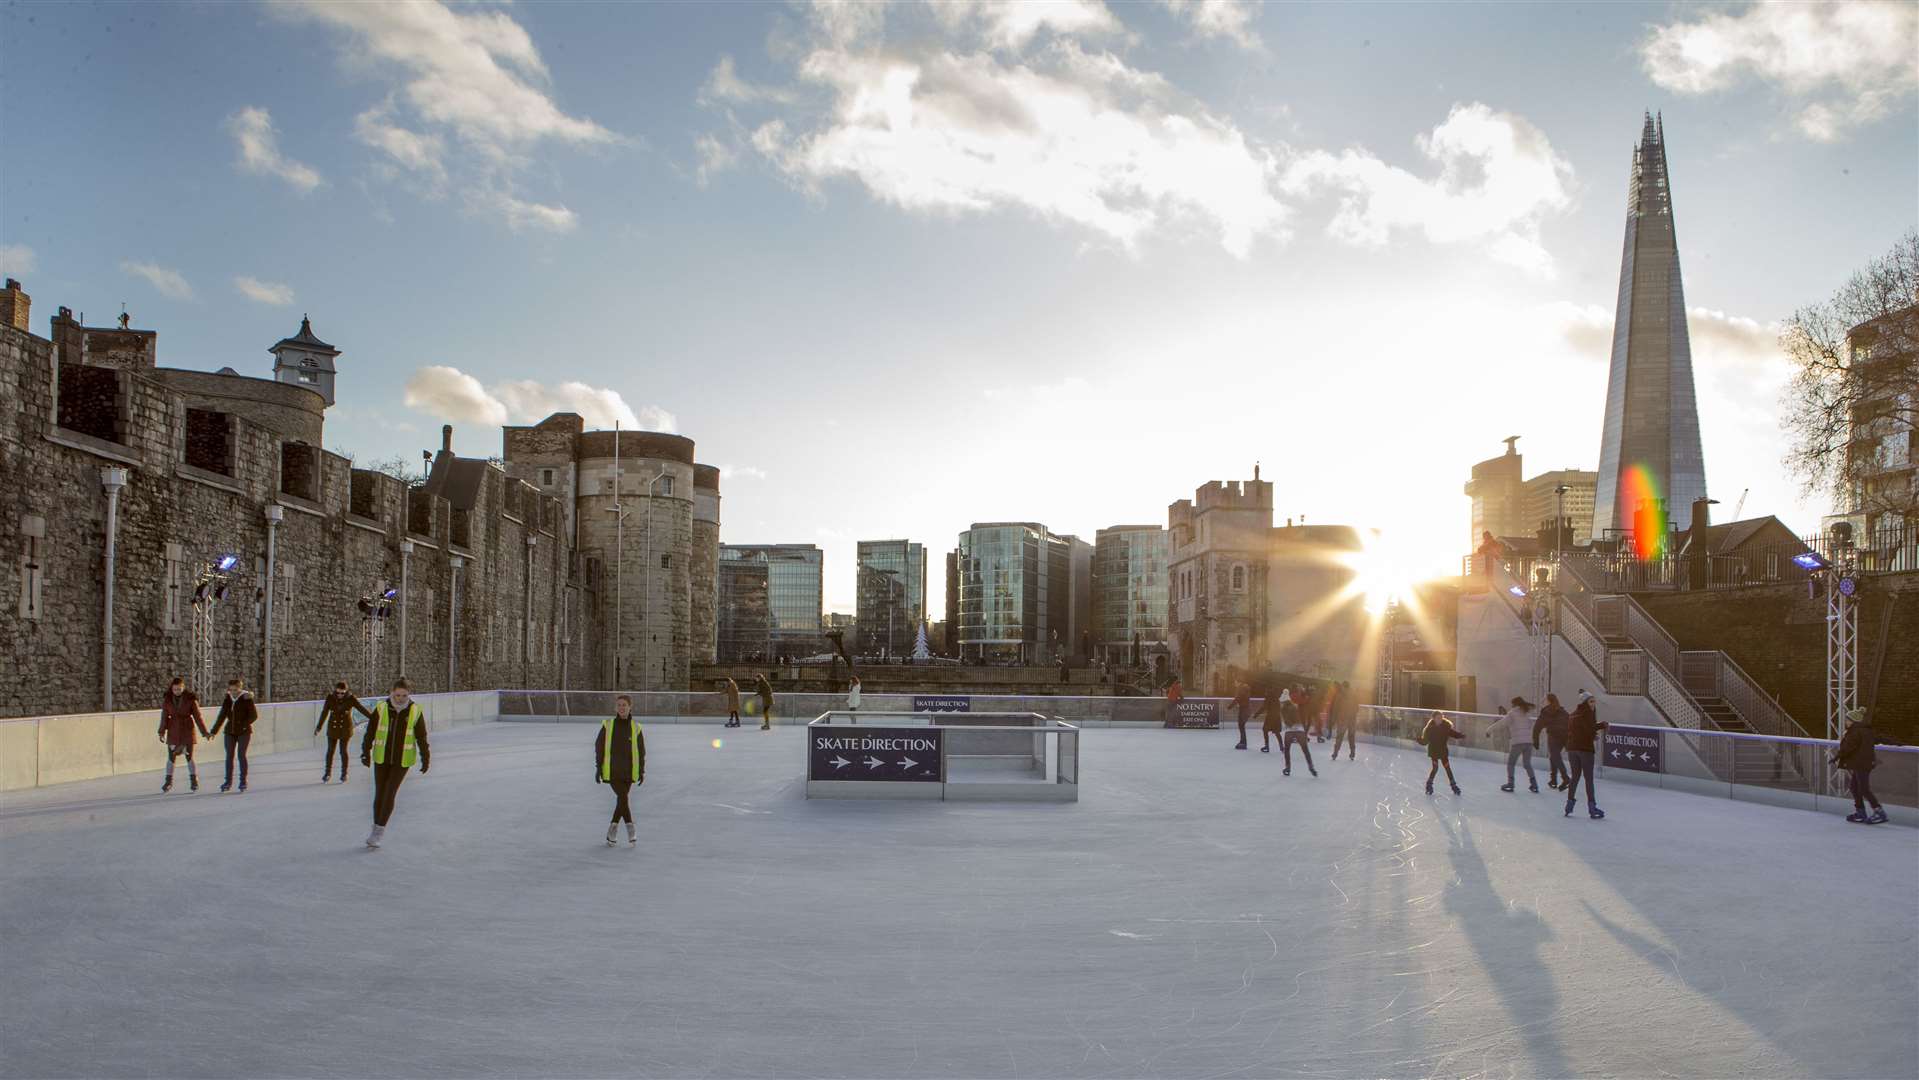 The Tower of London ice rink has a central London location